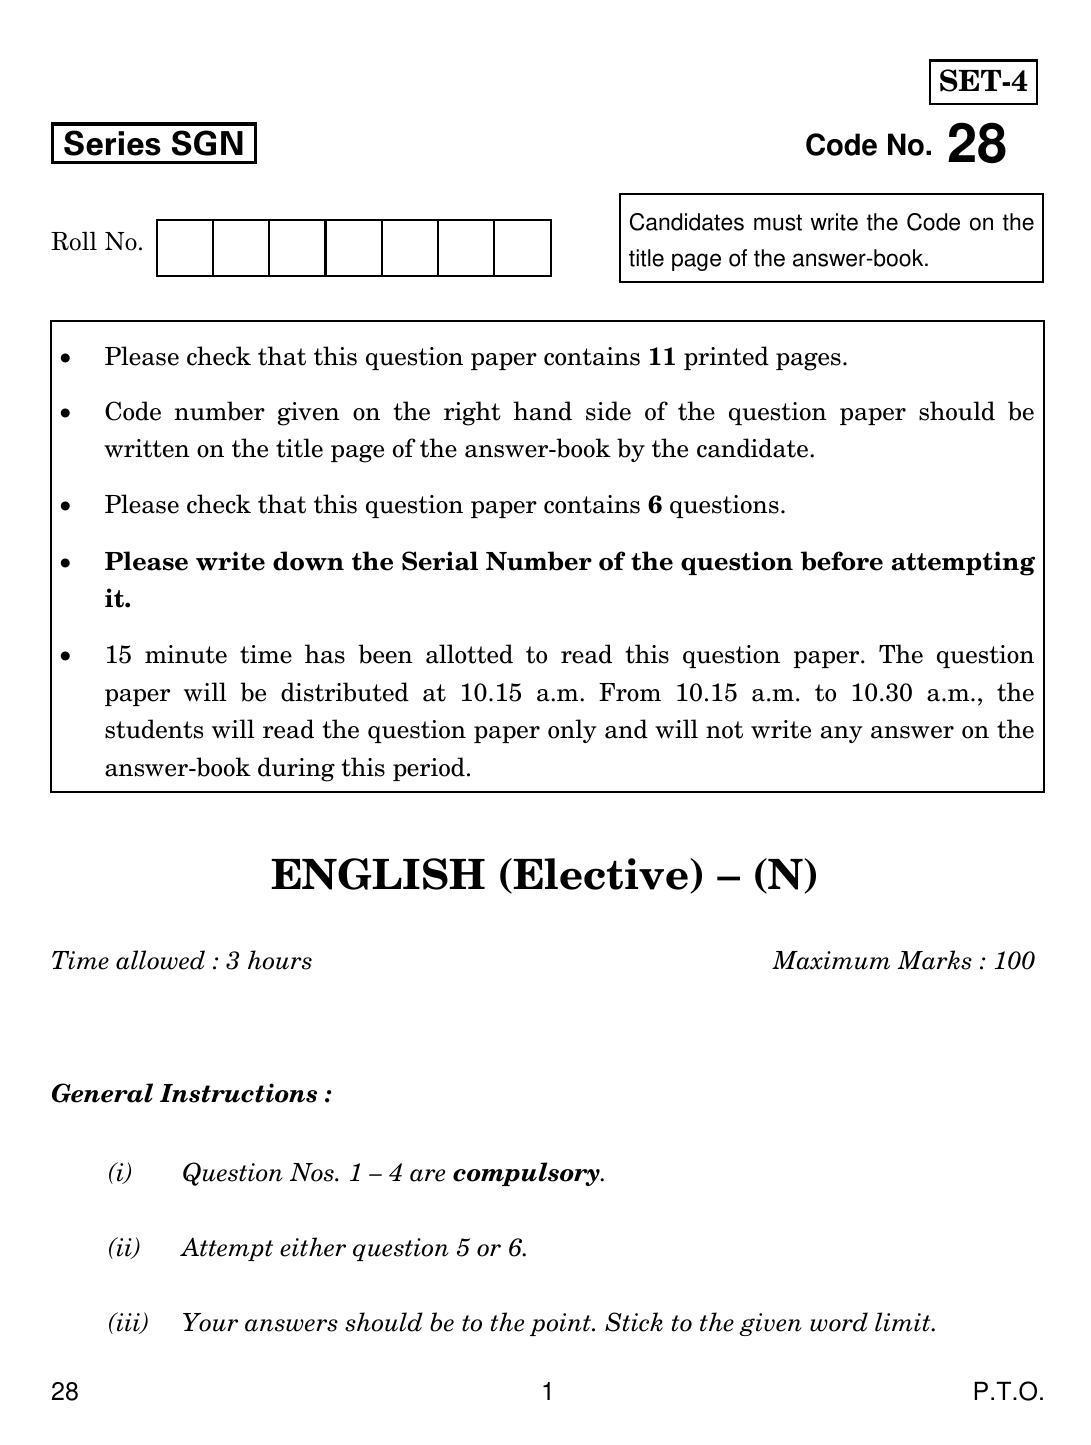 CBSE Class 12 28 ENGLISH ELECTIVE NCERT 2018 Question Paper - Page 1